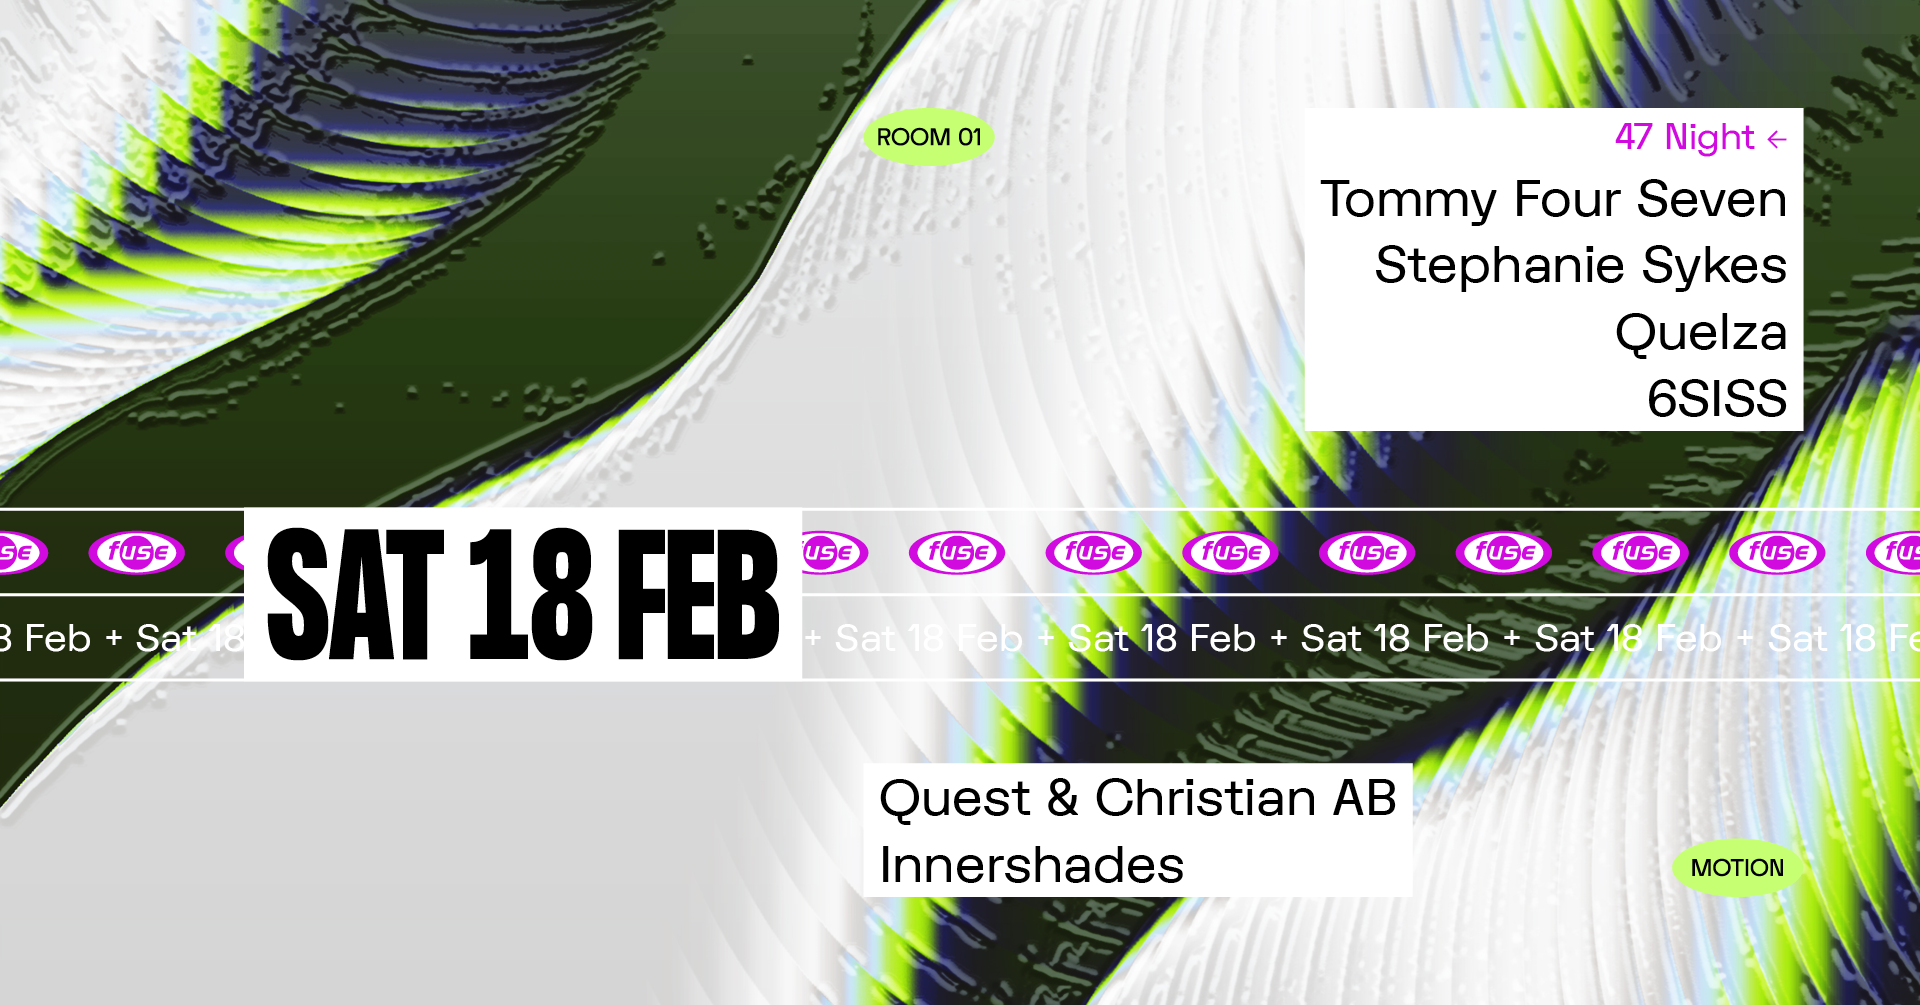 Fuse presents: 47 night with Tommy Four Seven & Stephanie Sykes - Página frontal